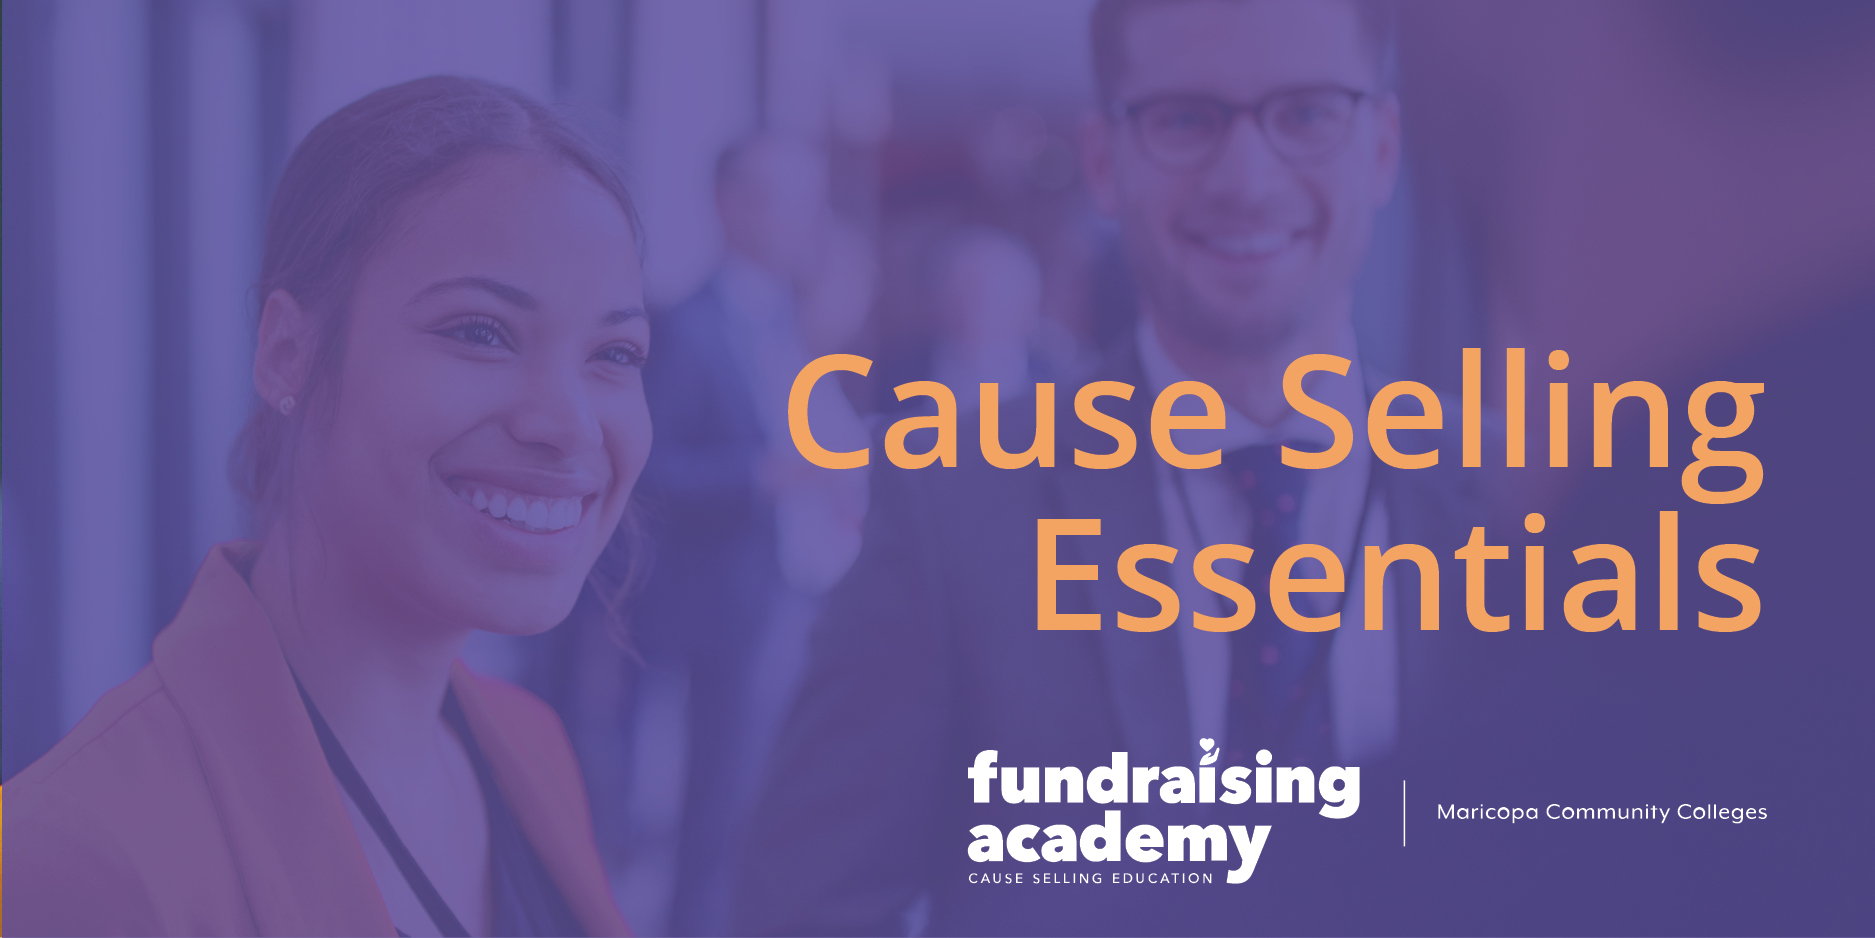 Fundraising Academy - Cause Selling Essentials